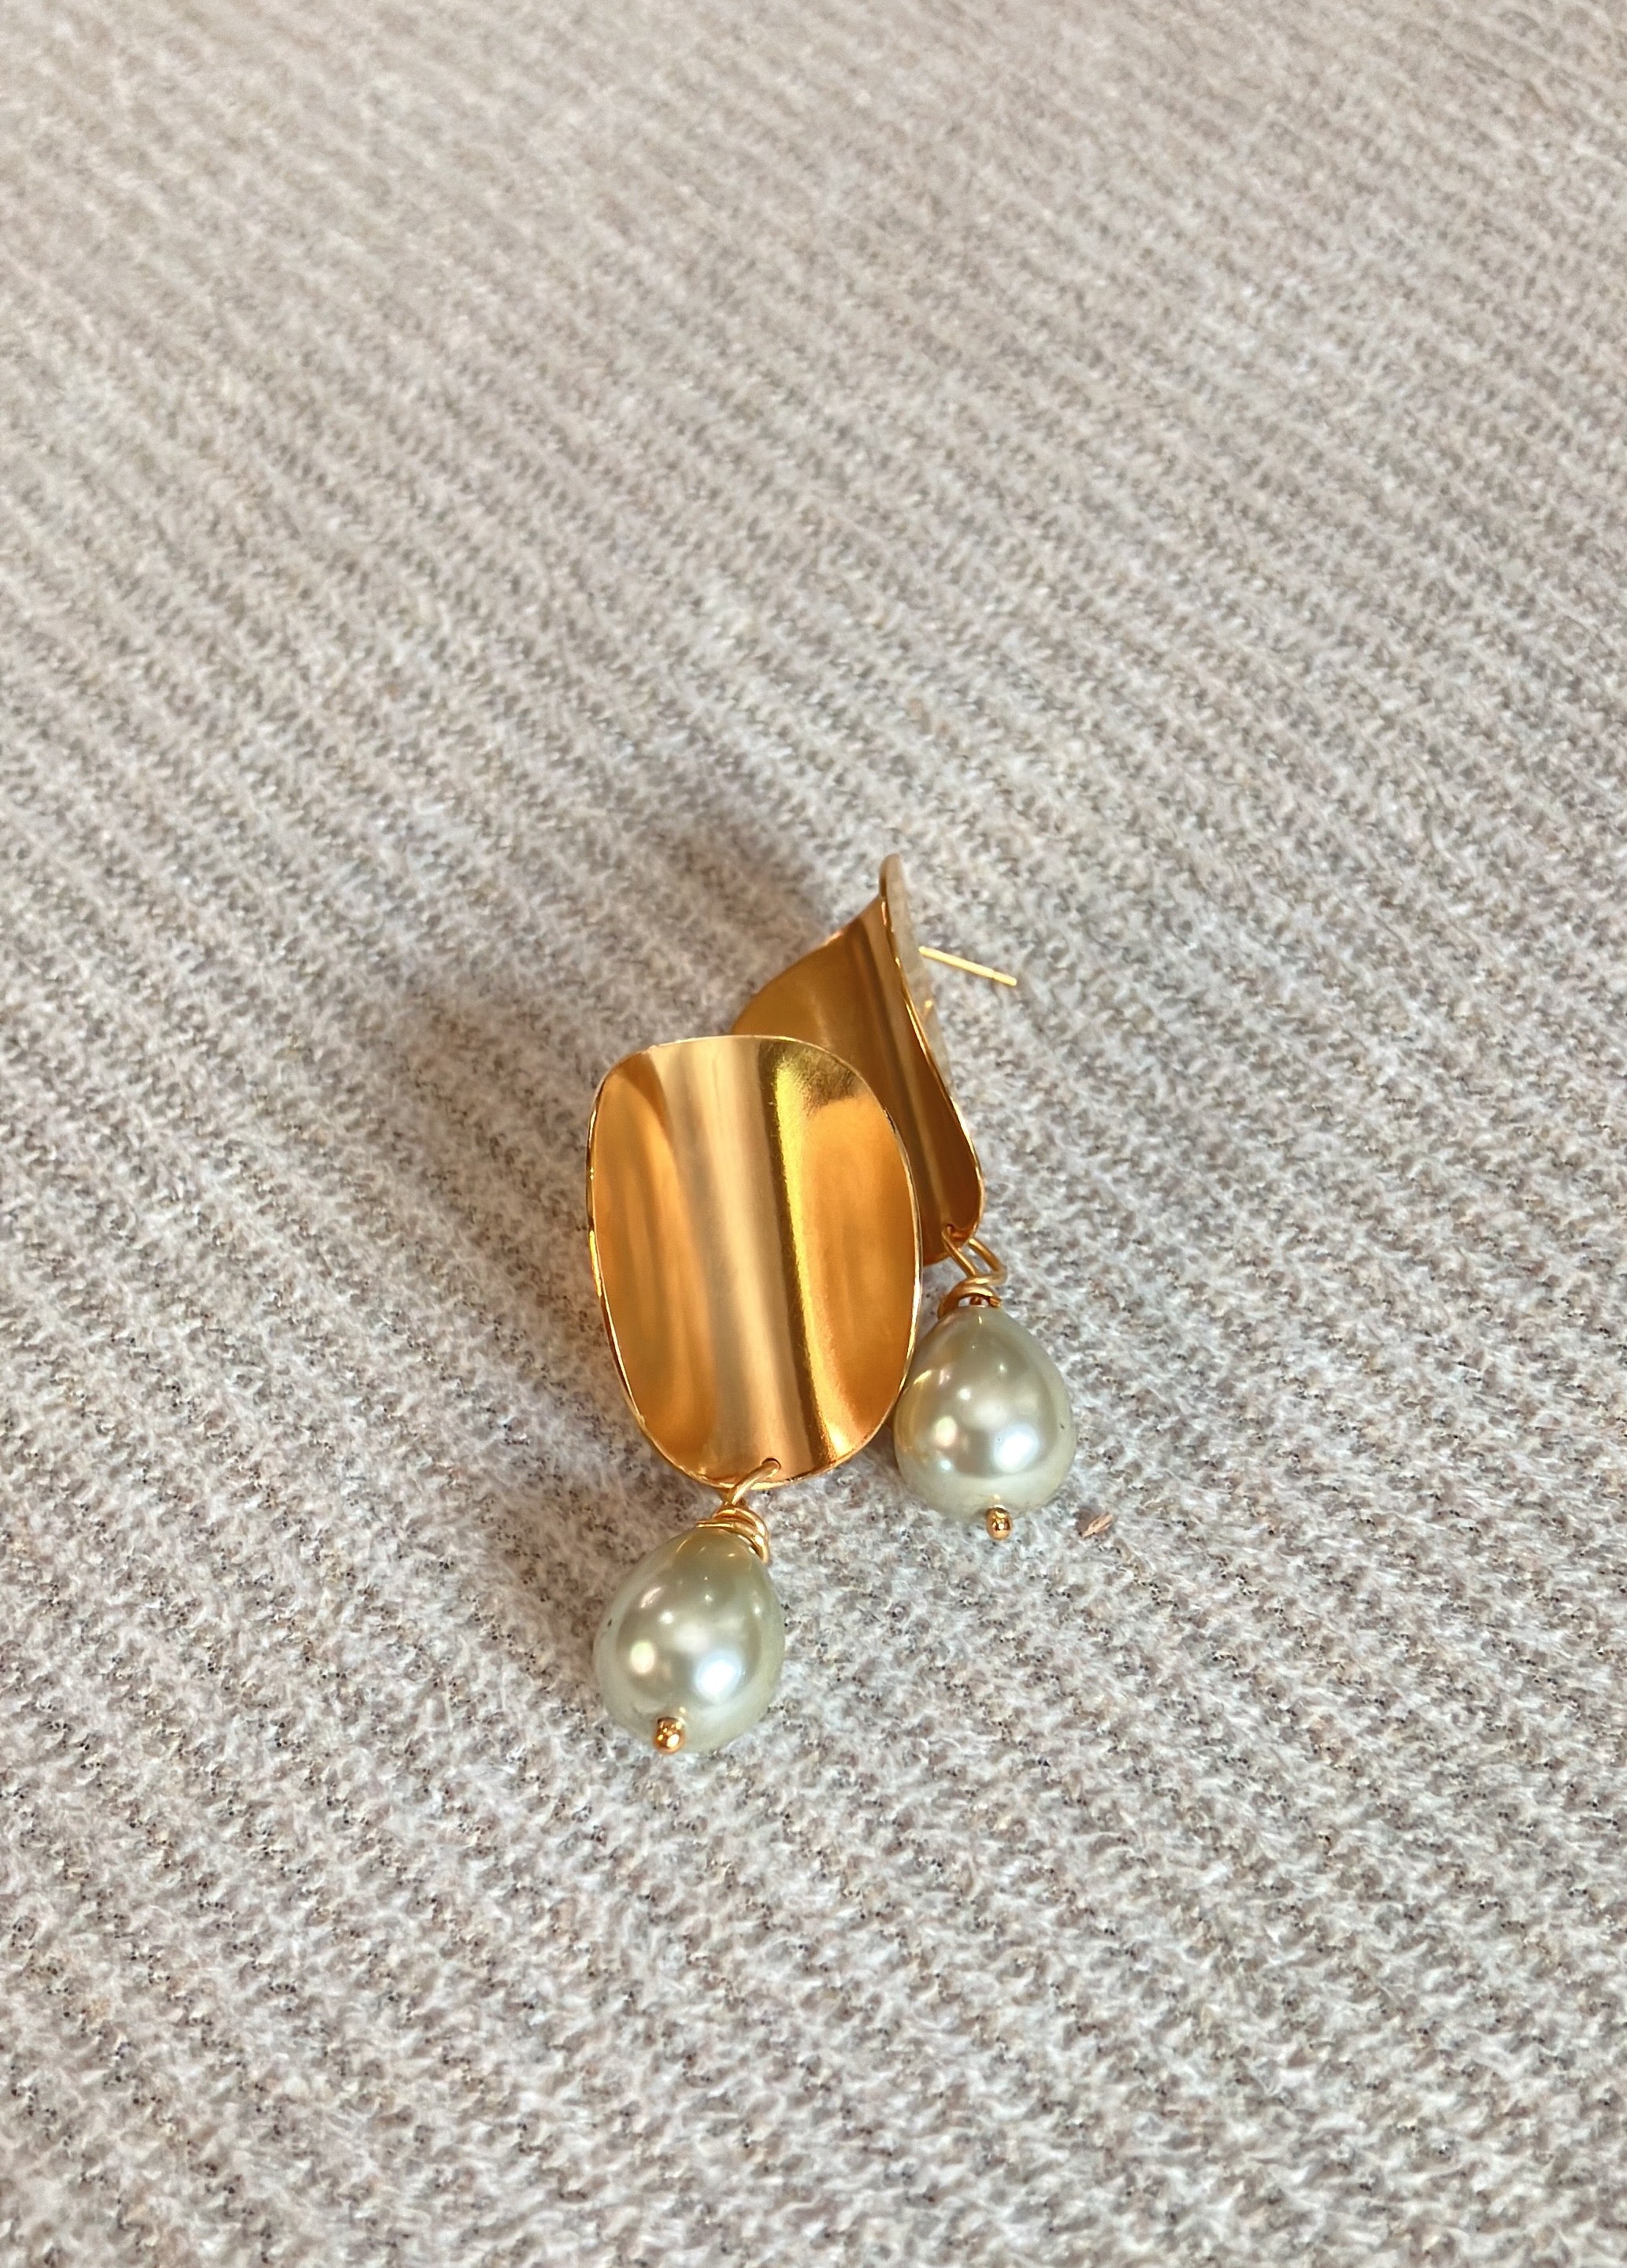 a gold plated medium sized folded circle statement earrings with a creamy colored pearl dangling at the bottom